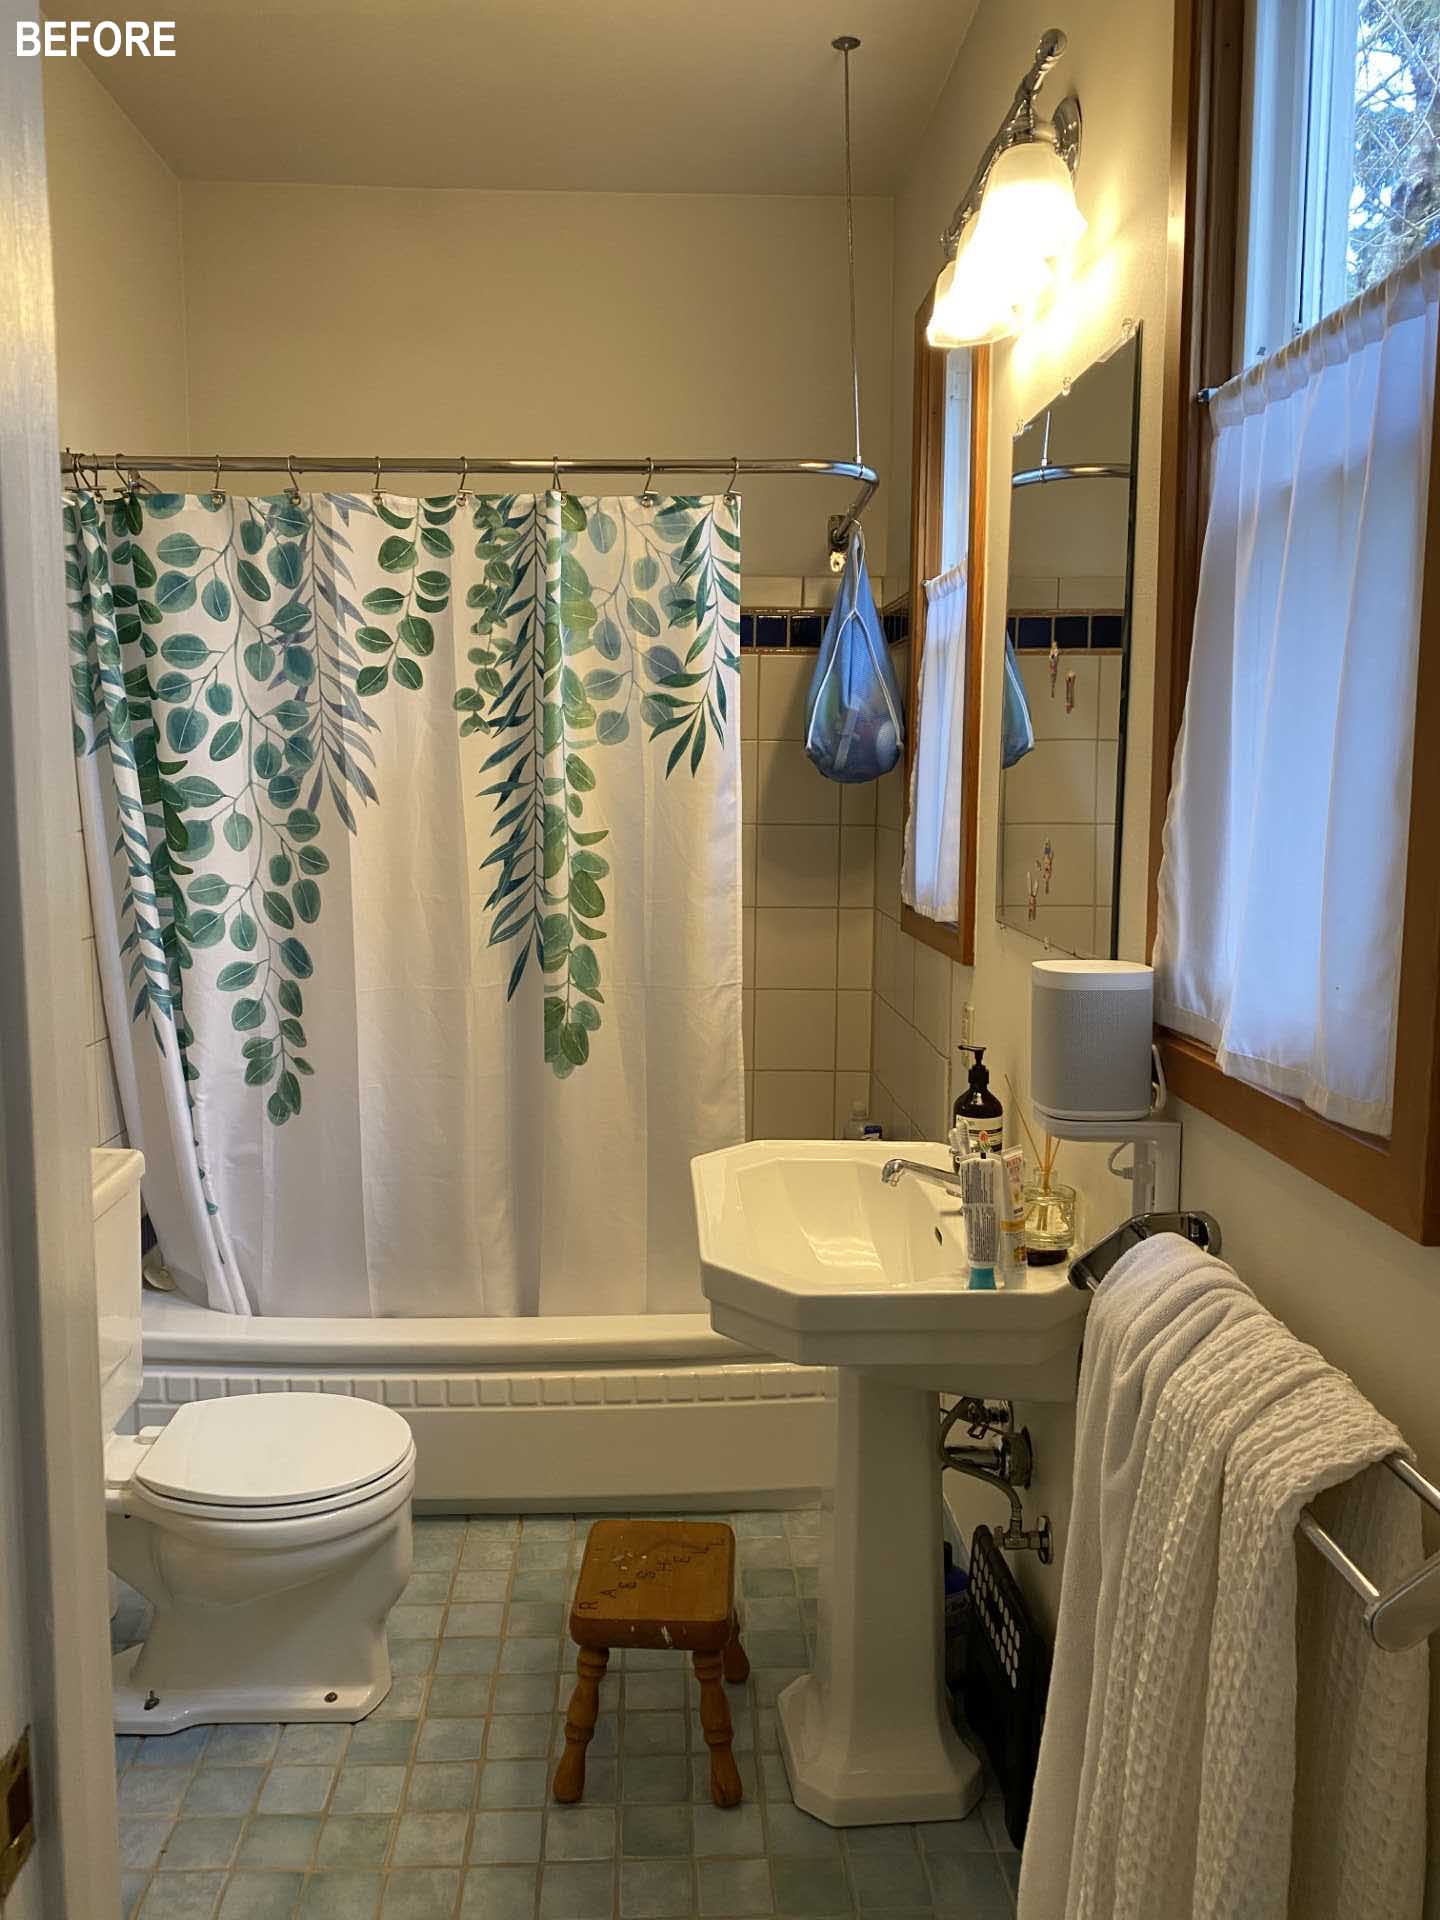 The 'before' photo of a bathroom.